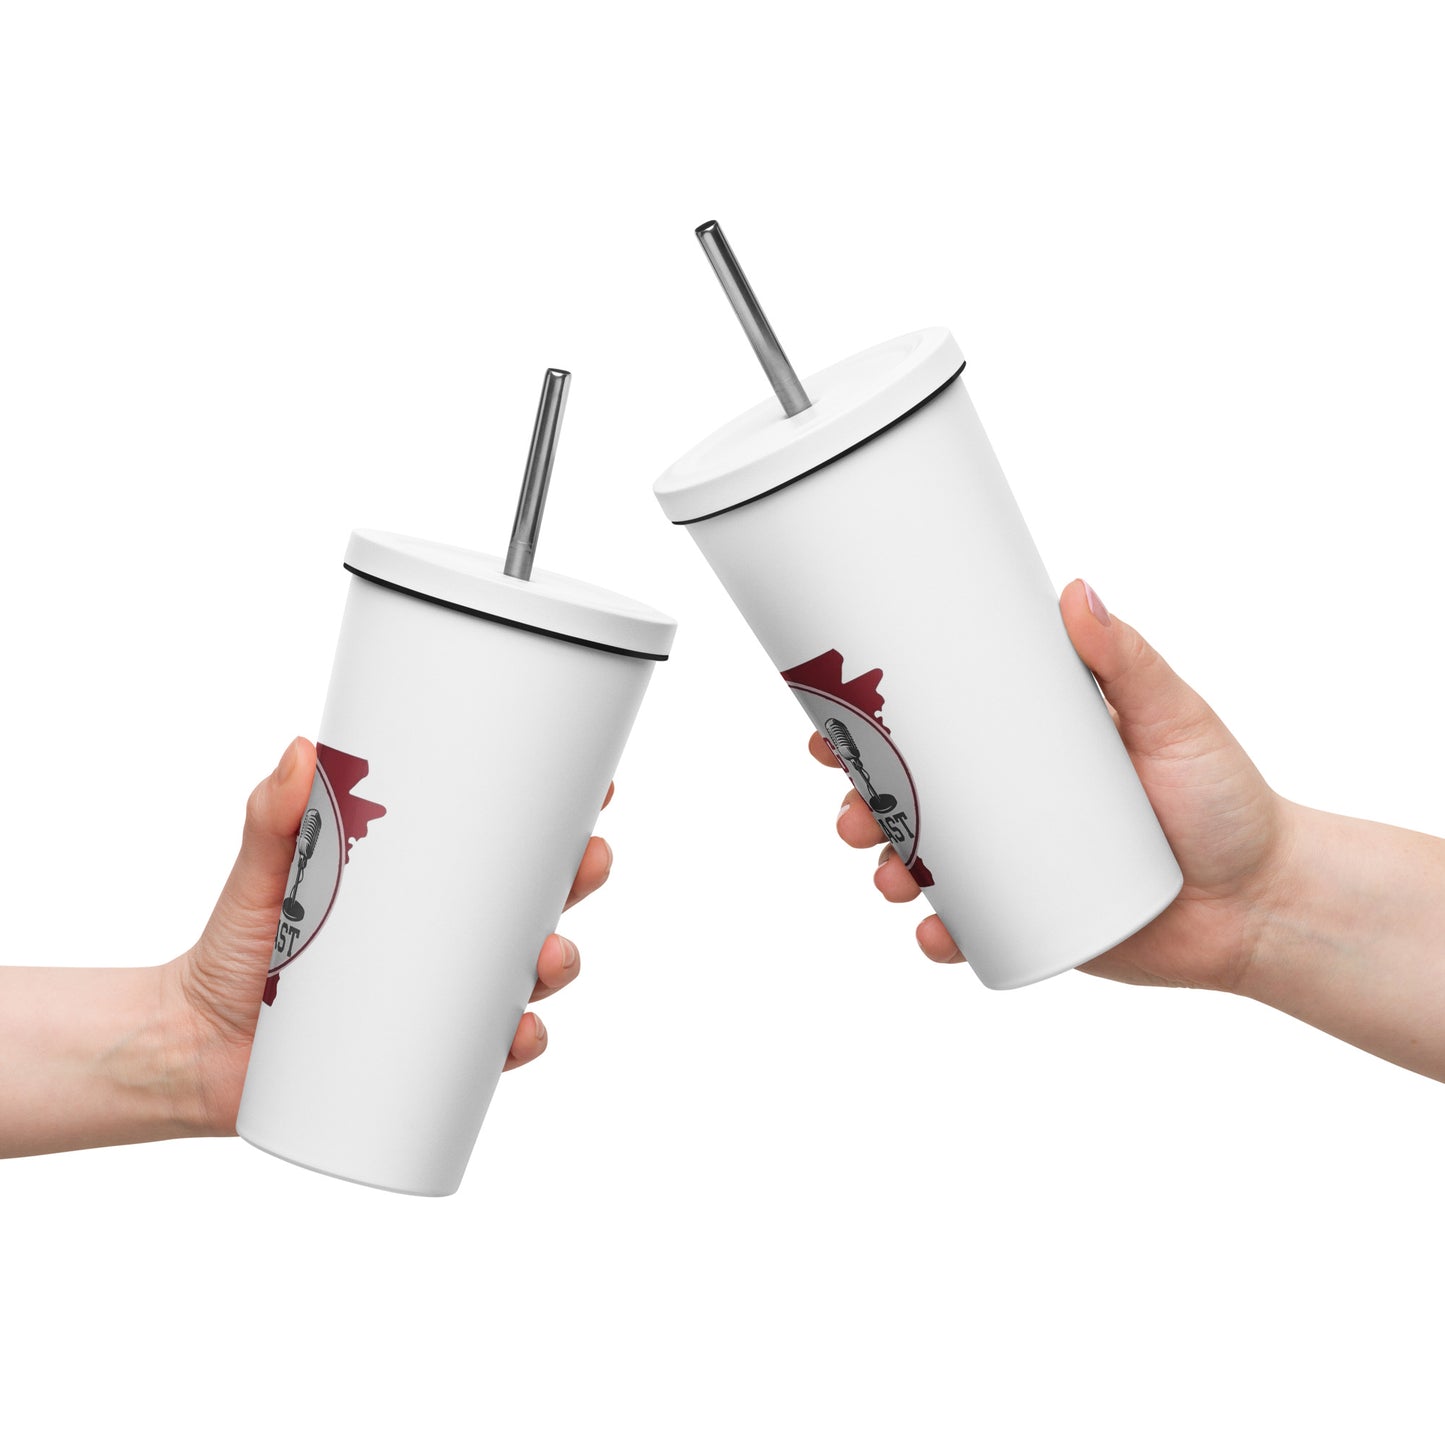 Hawg Talk Podcast Insulated tumbler with a straw